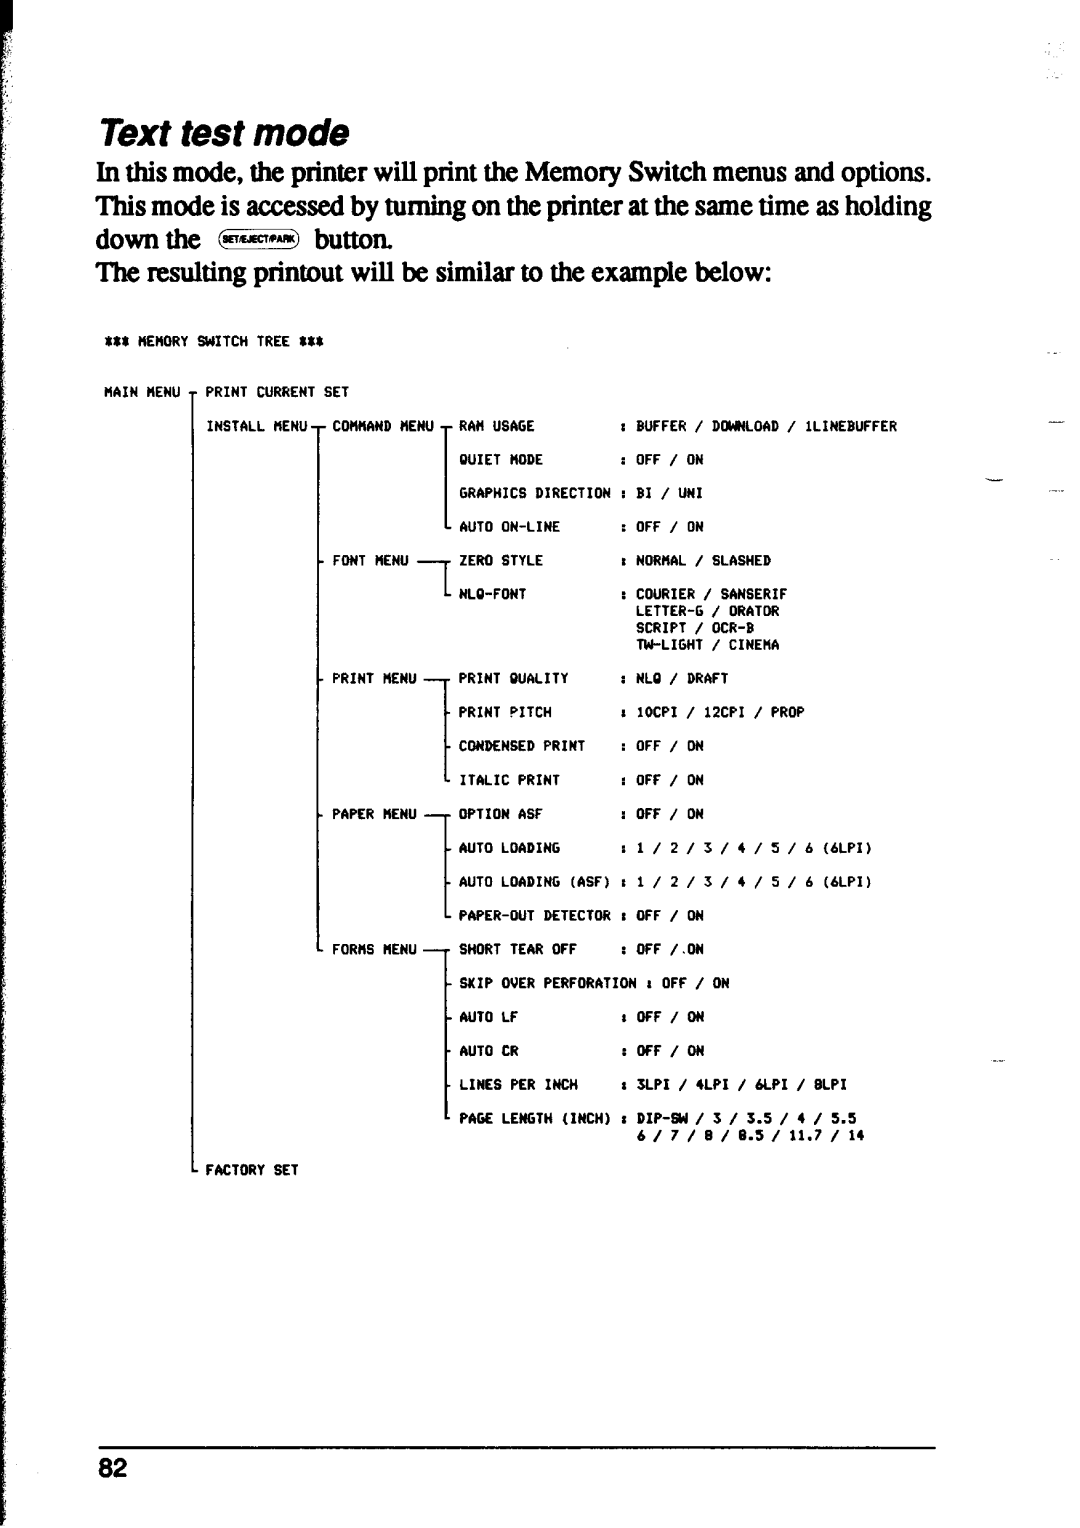 Star Micronics XR-1500, XR-1000 Text test mode, The resulting printout will be similar to the example below, 1OCPI 